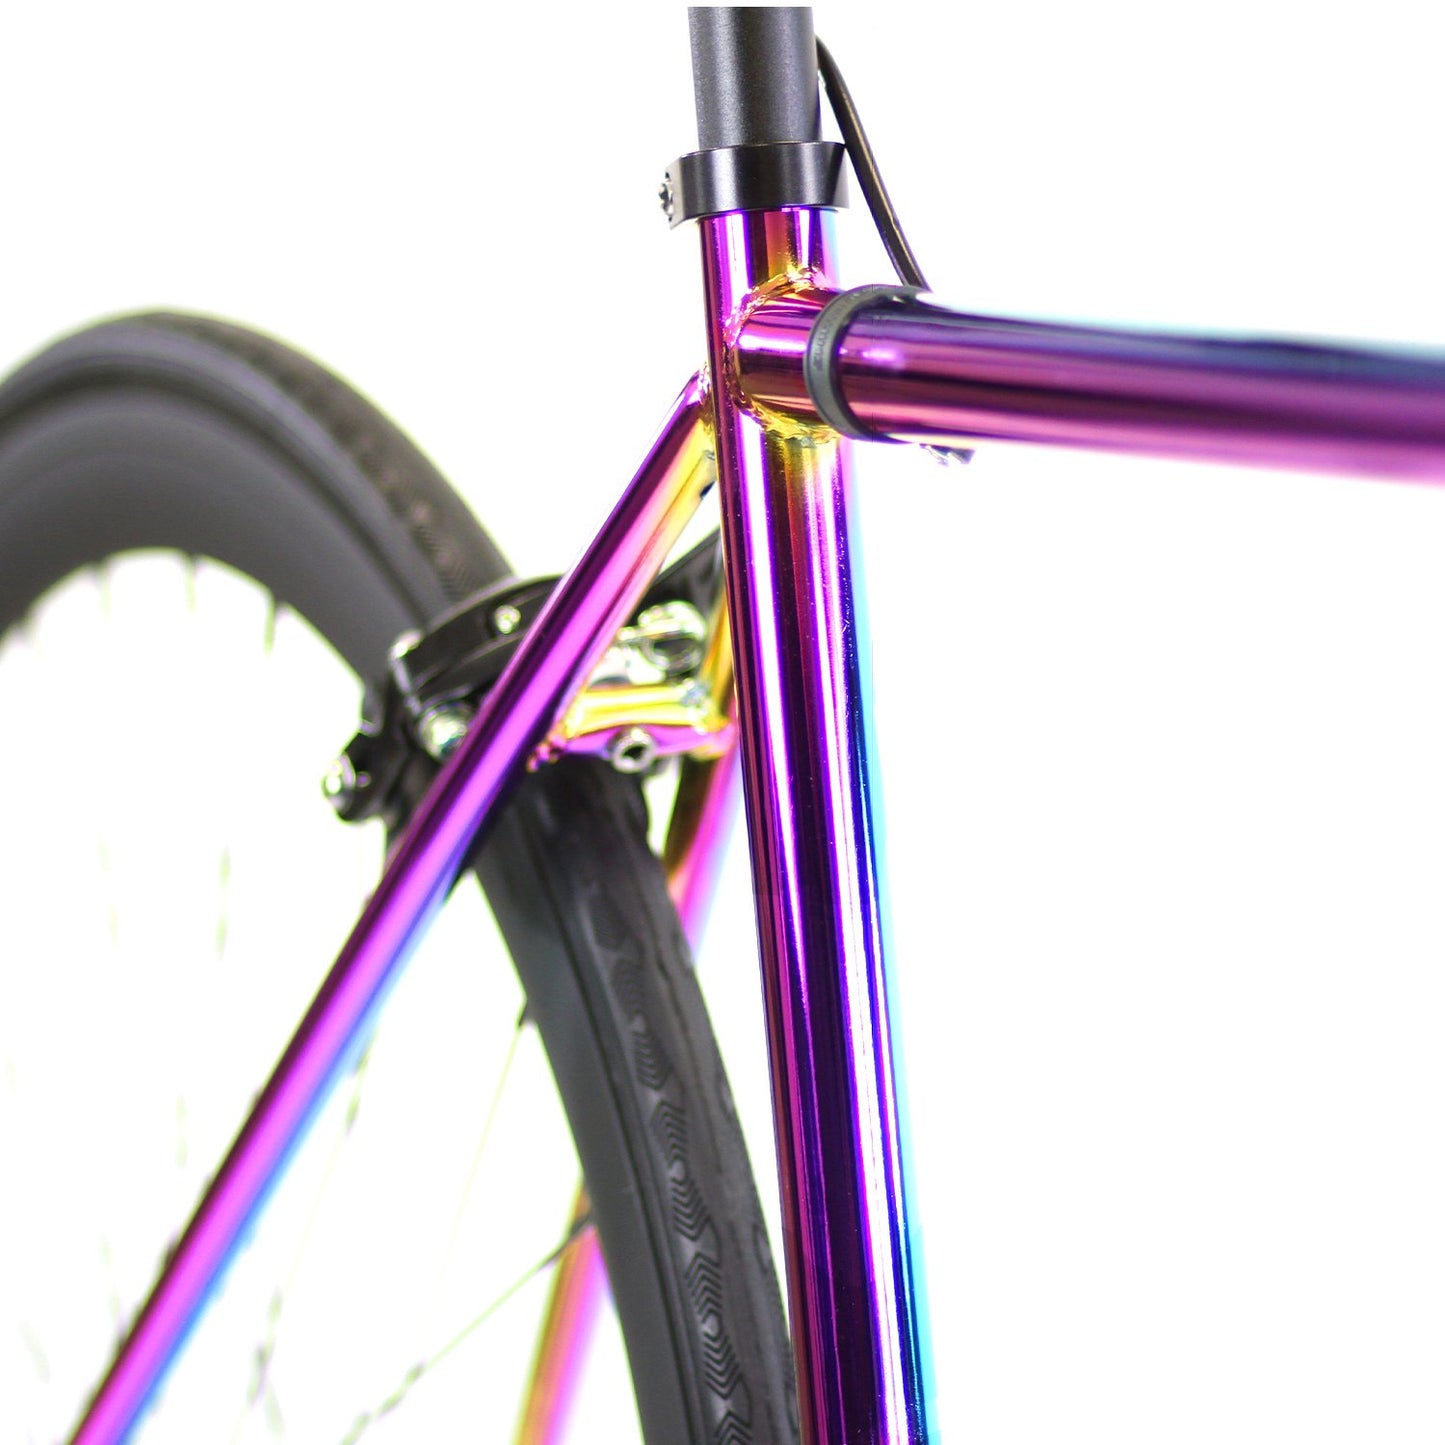 Golden Cycles - GC - Oil Slick Cycle | Single Speed Road Bike | Single Speed Cycle | Fixed Gear Bike | Affordable Cycle | Bike Lover USA